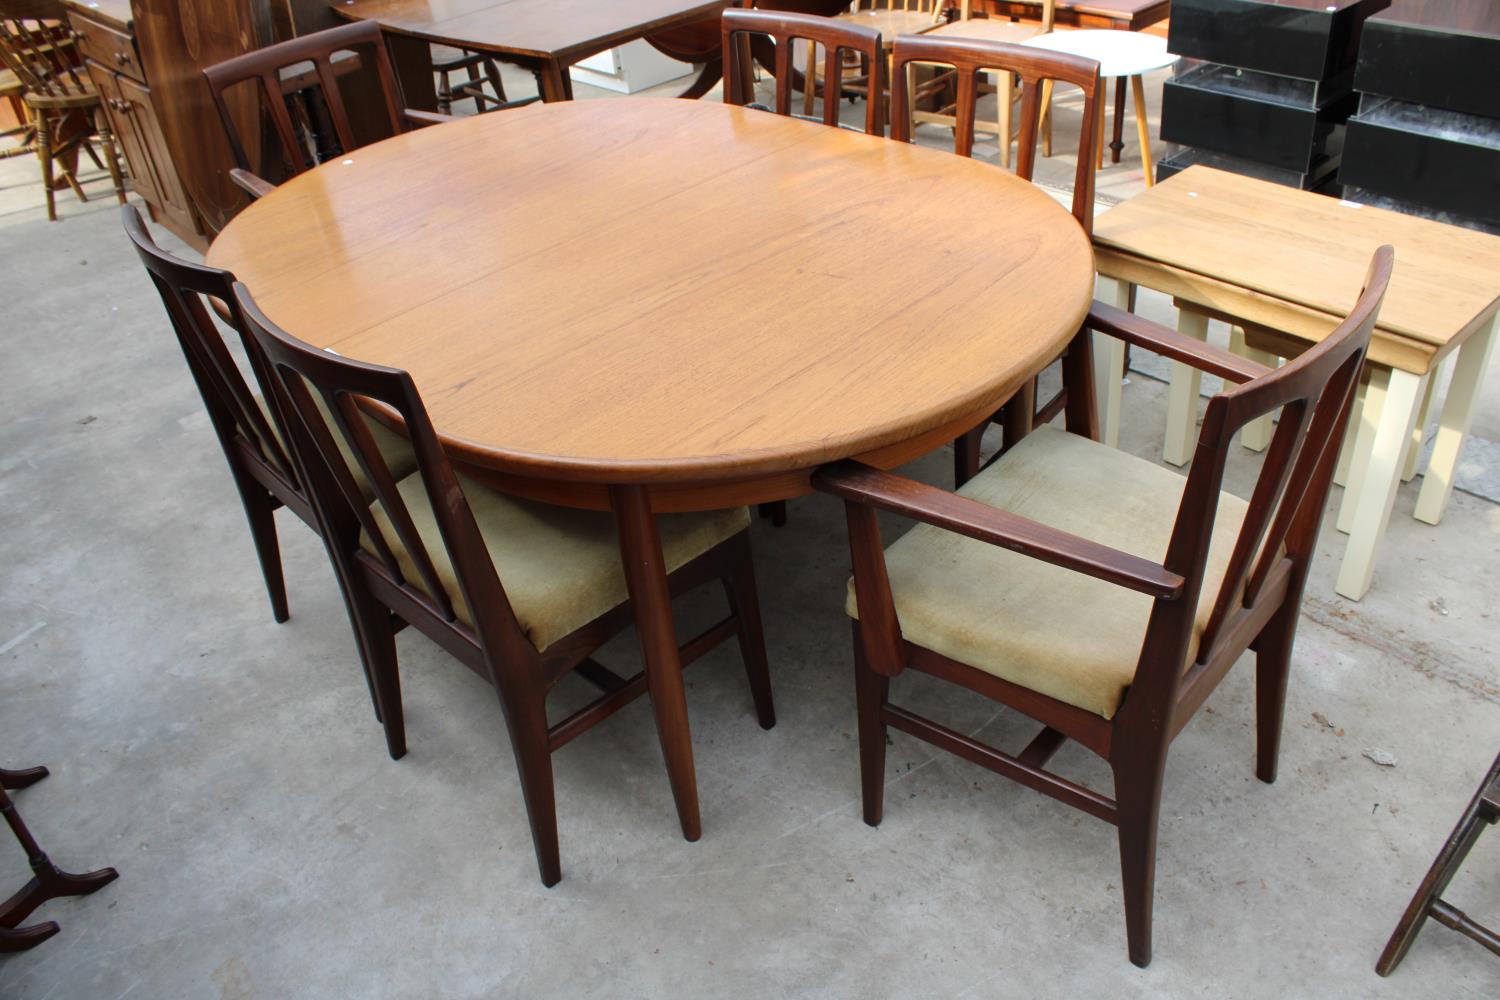 A G PLAN RETRO TEAK EXTENDING DINING TABLE, 64" X 44" (LEAF 18") AND SIX CHAIRS, TWO BEING CARVERS